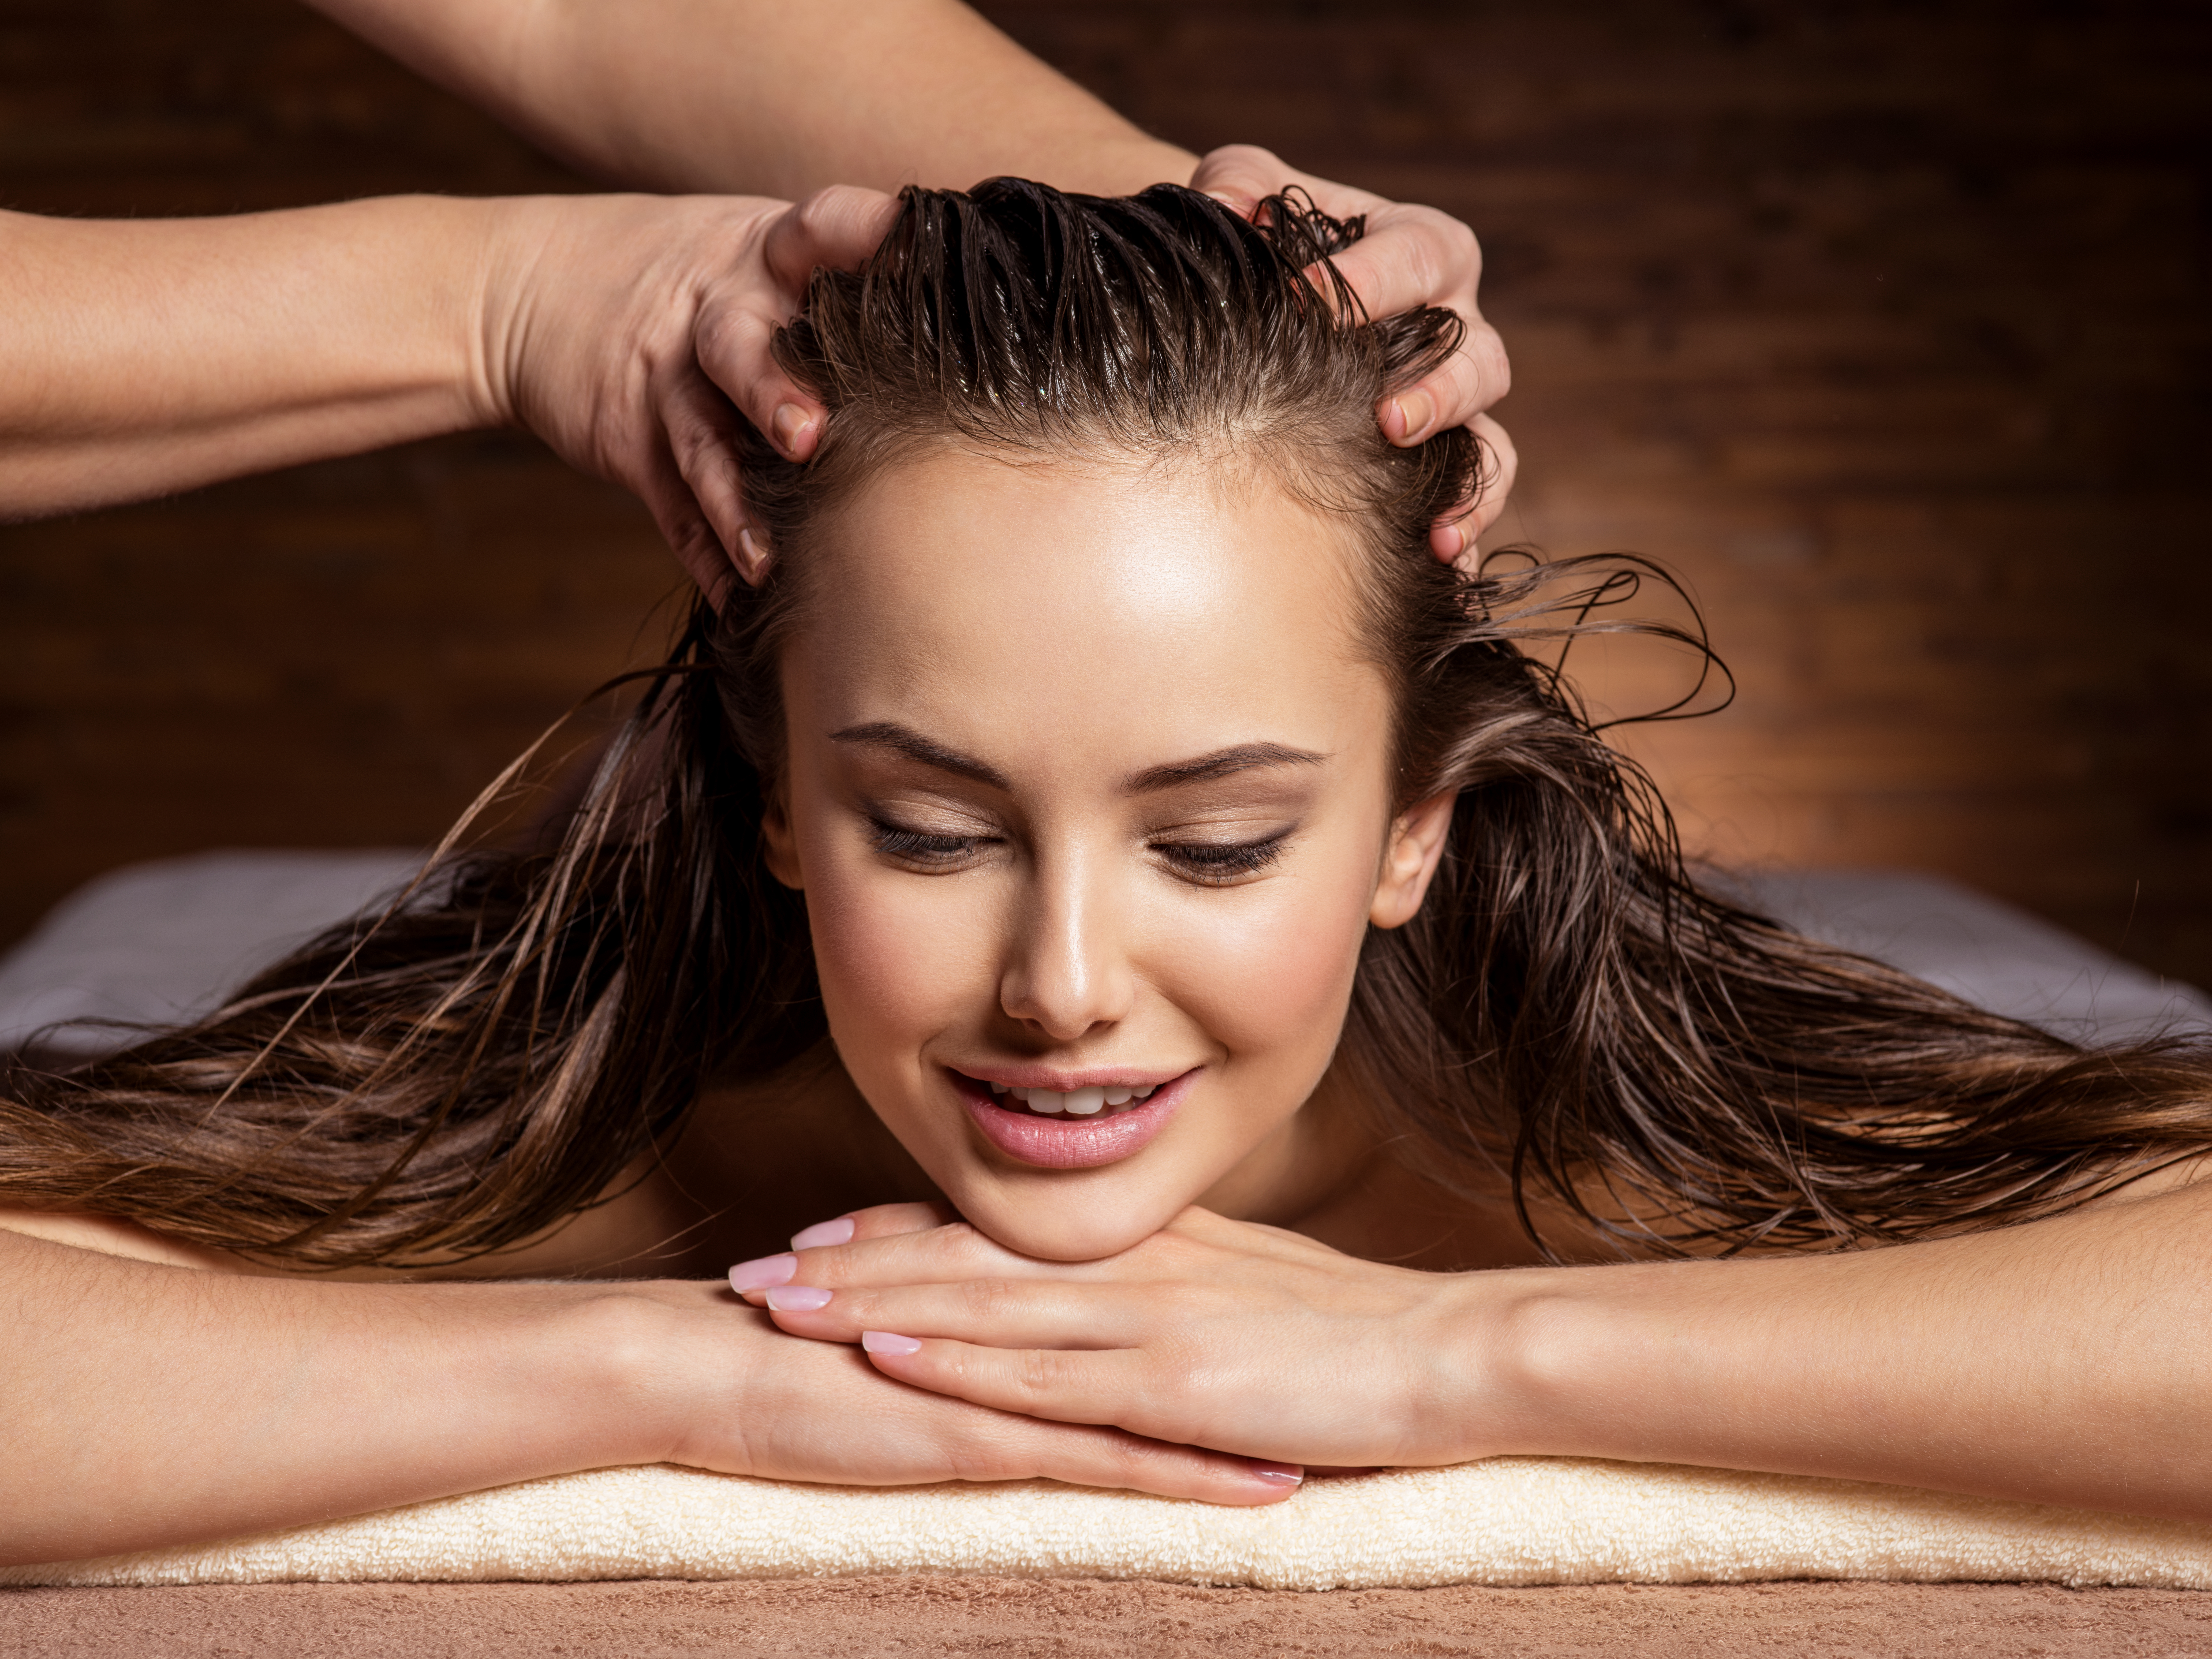 FAQs around Hair Spas 1. What is the cost of getting a Hair Spa? At Bodycraft, the cost of a Hair Spa starts from Rs. 400. Depending on the type of treatment you want, the hair spa procedure price can increase. 2. What should I take care of to make my Hair Spa results last longer? Once you get the hair spa procedure, don’t wash your hair for the next 2-3 days. Don’t go for a swim as the chlorine water can damage your hair and ruin the effects of a hair spa. In case you’re stepping out, wear a scarf or hat to protect your hair from sun damage.